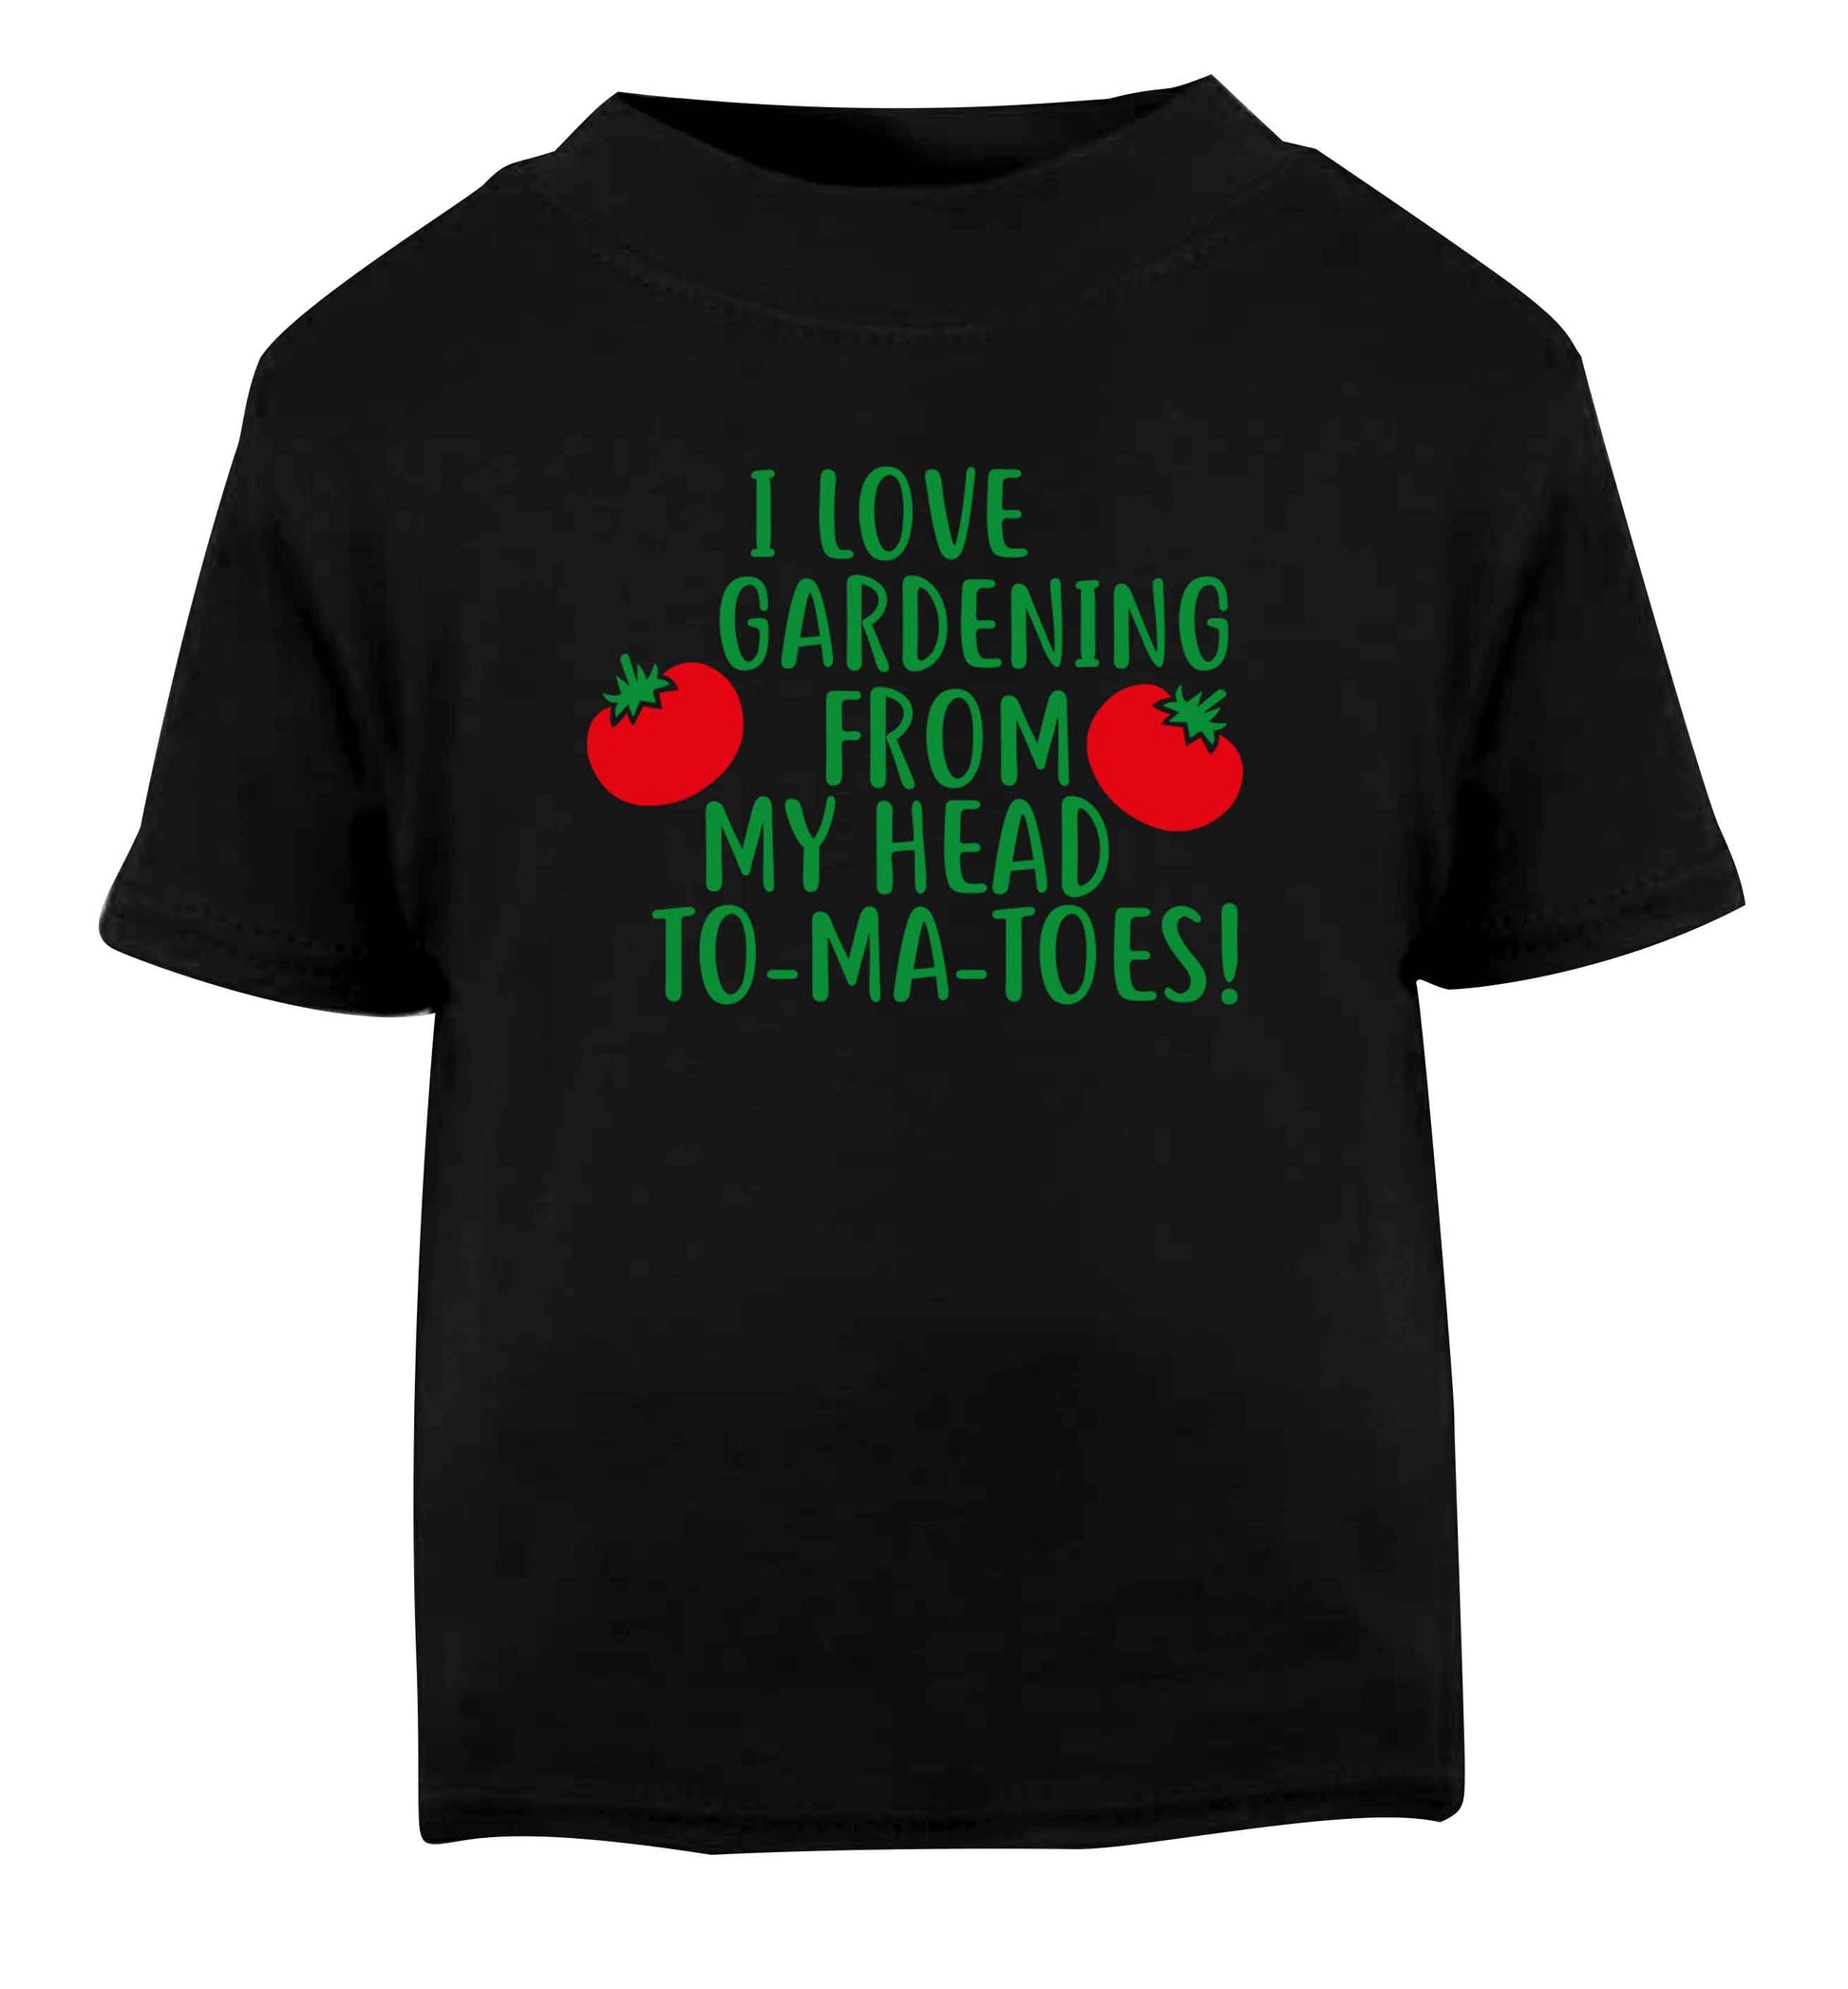 I love gardening from my head to-ma-toes Black Baby Toddler Tshirt 2 years